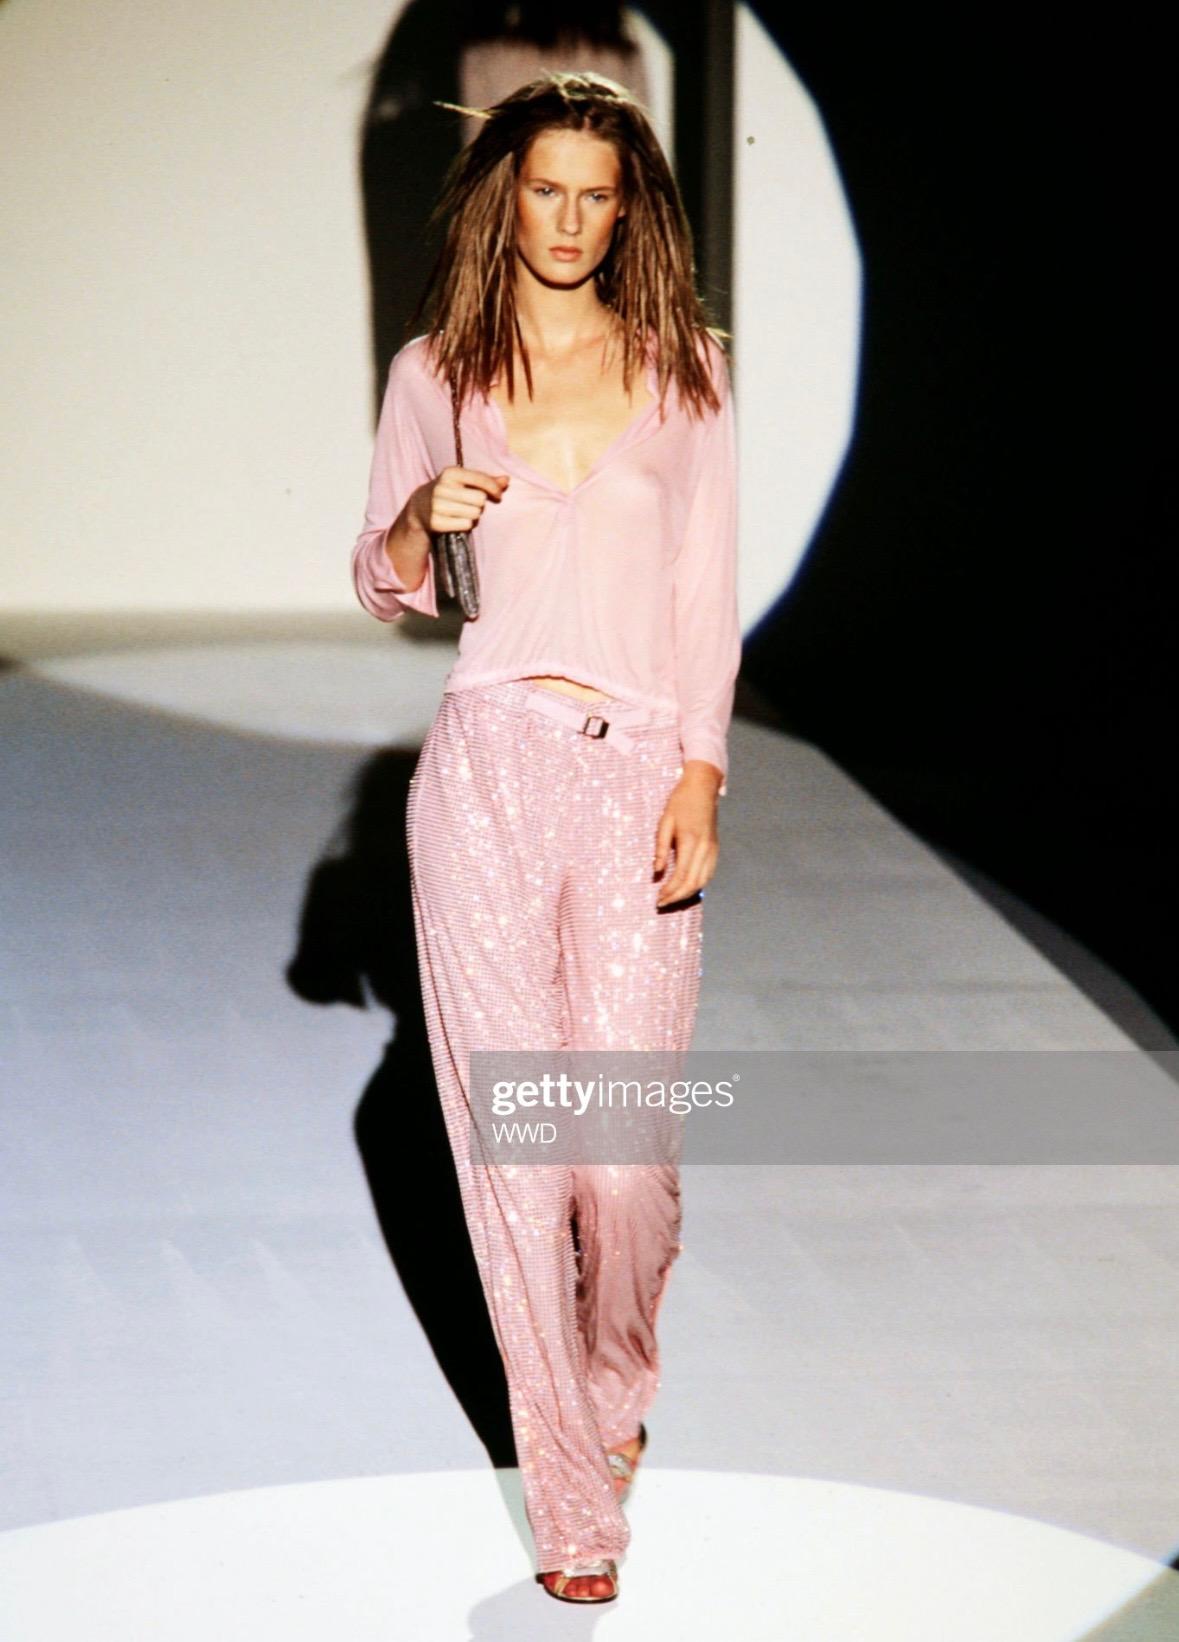 Presenting a fabulous light pink Gucci collared top, designed by Tom Ford. From the Spring/Summer 2000 collection, this long-sleeve top debuted on the season's runway as part of look 8 on Lisa Ratliffe and appeared in the season's ad campaign,